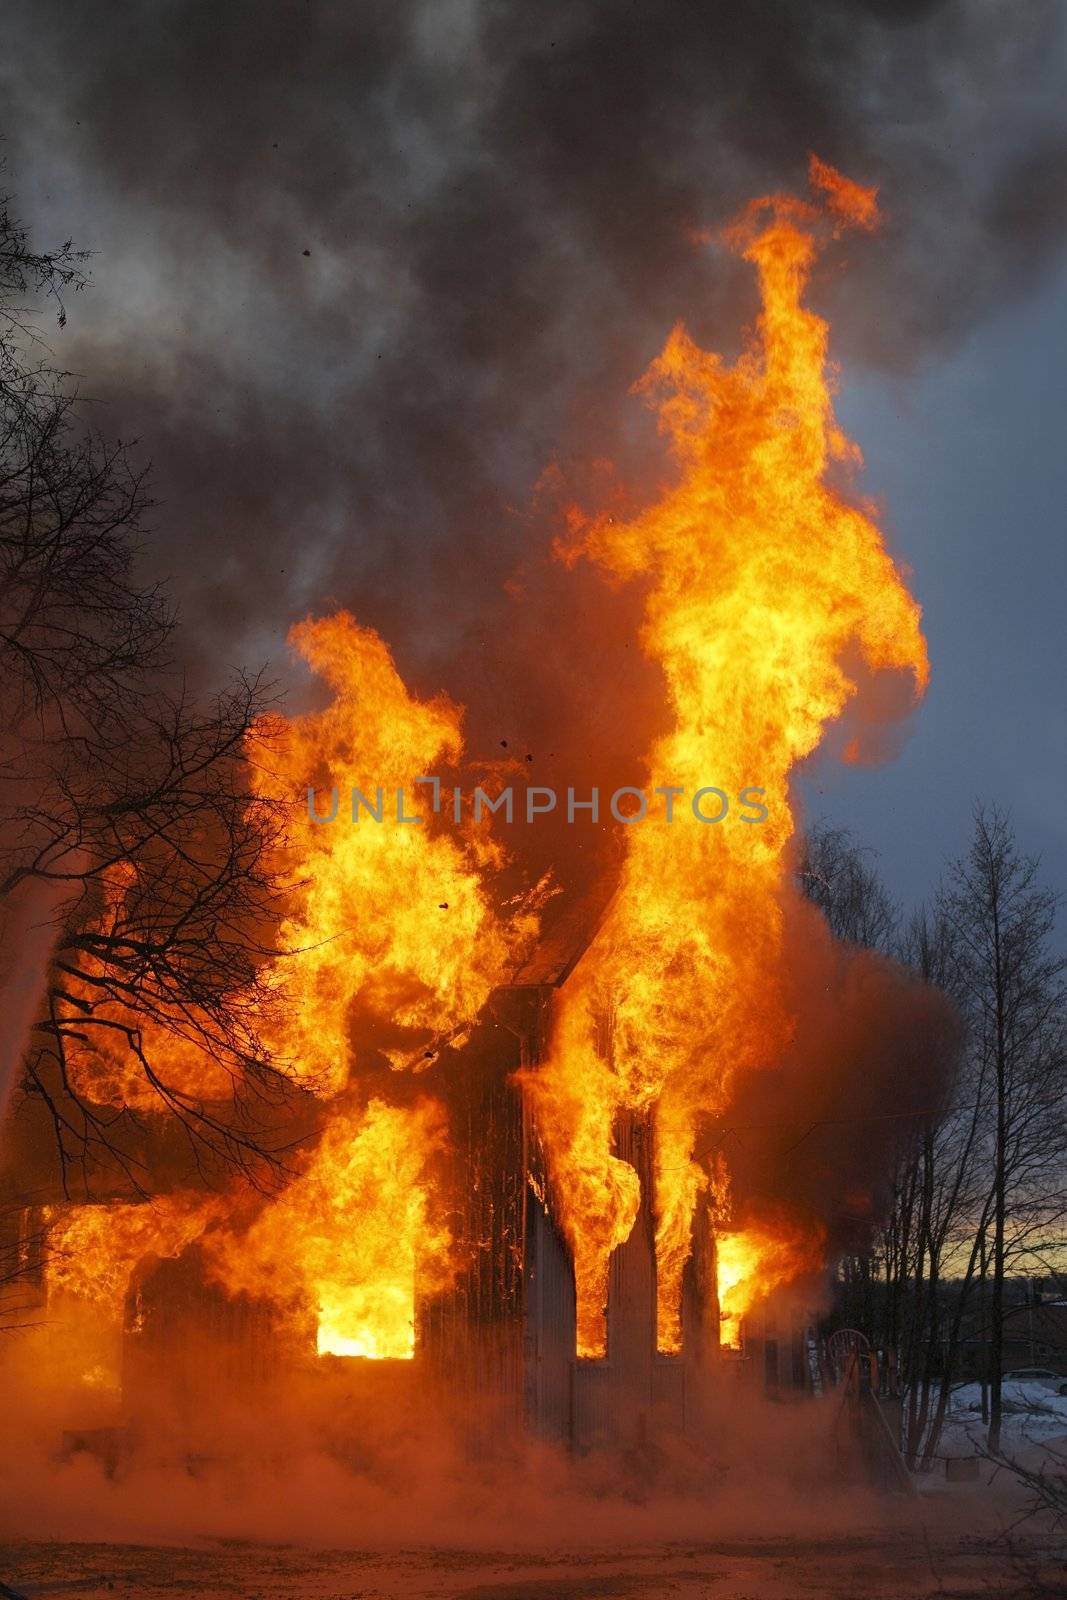 A Wooden house in flames